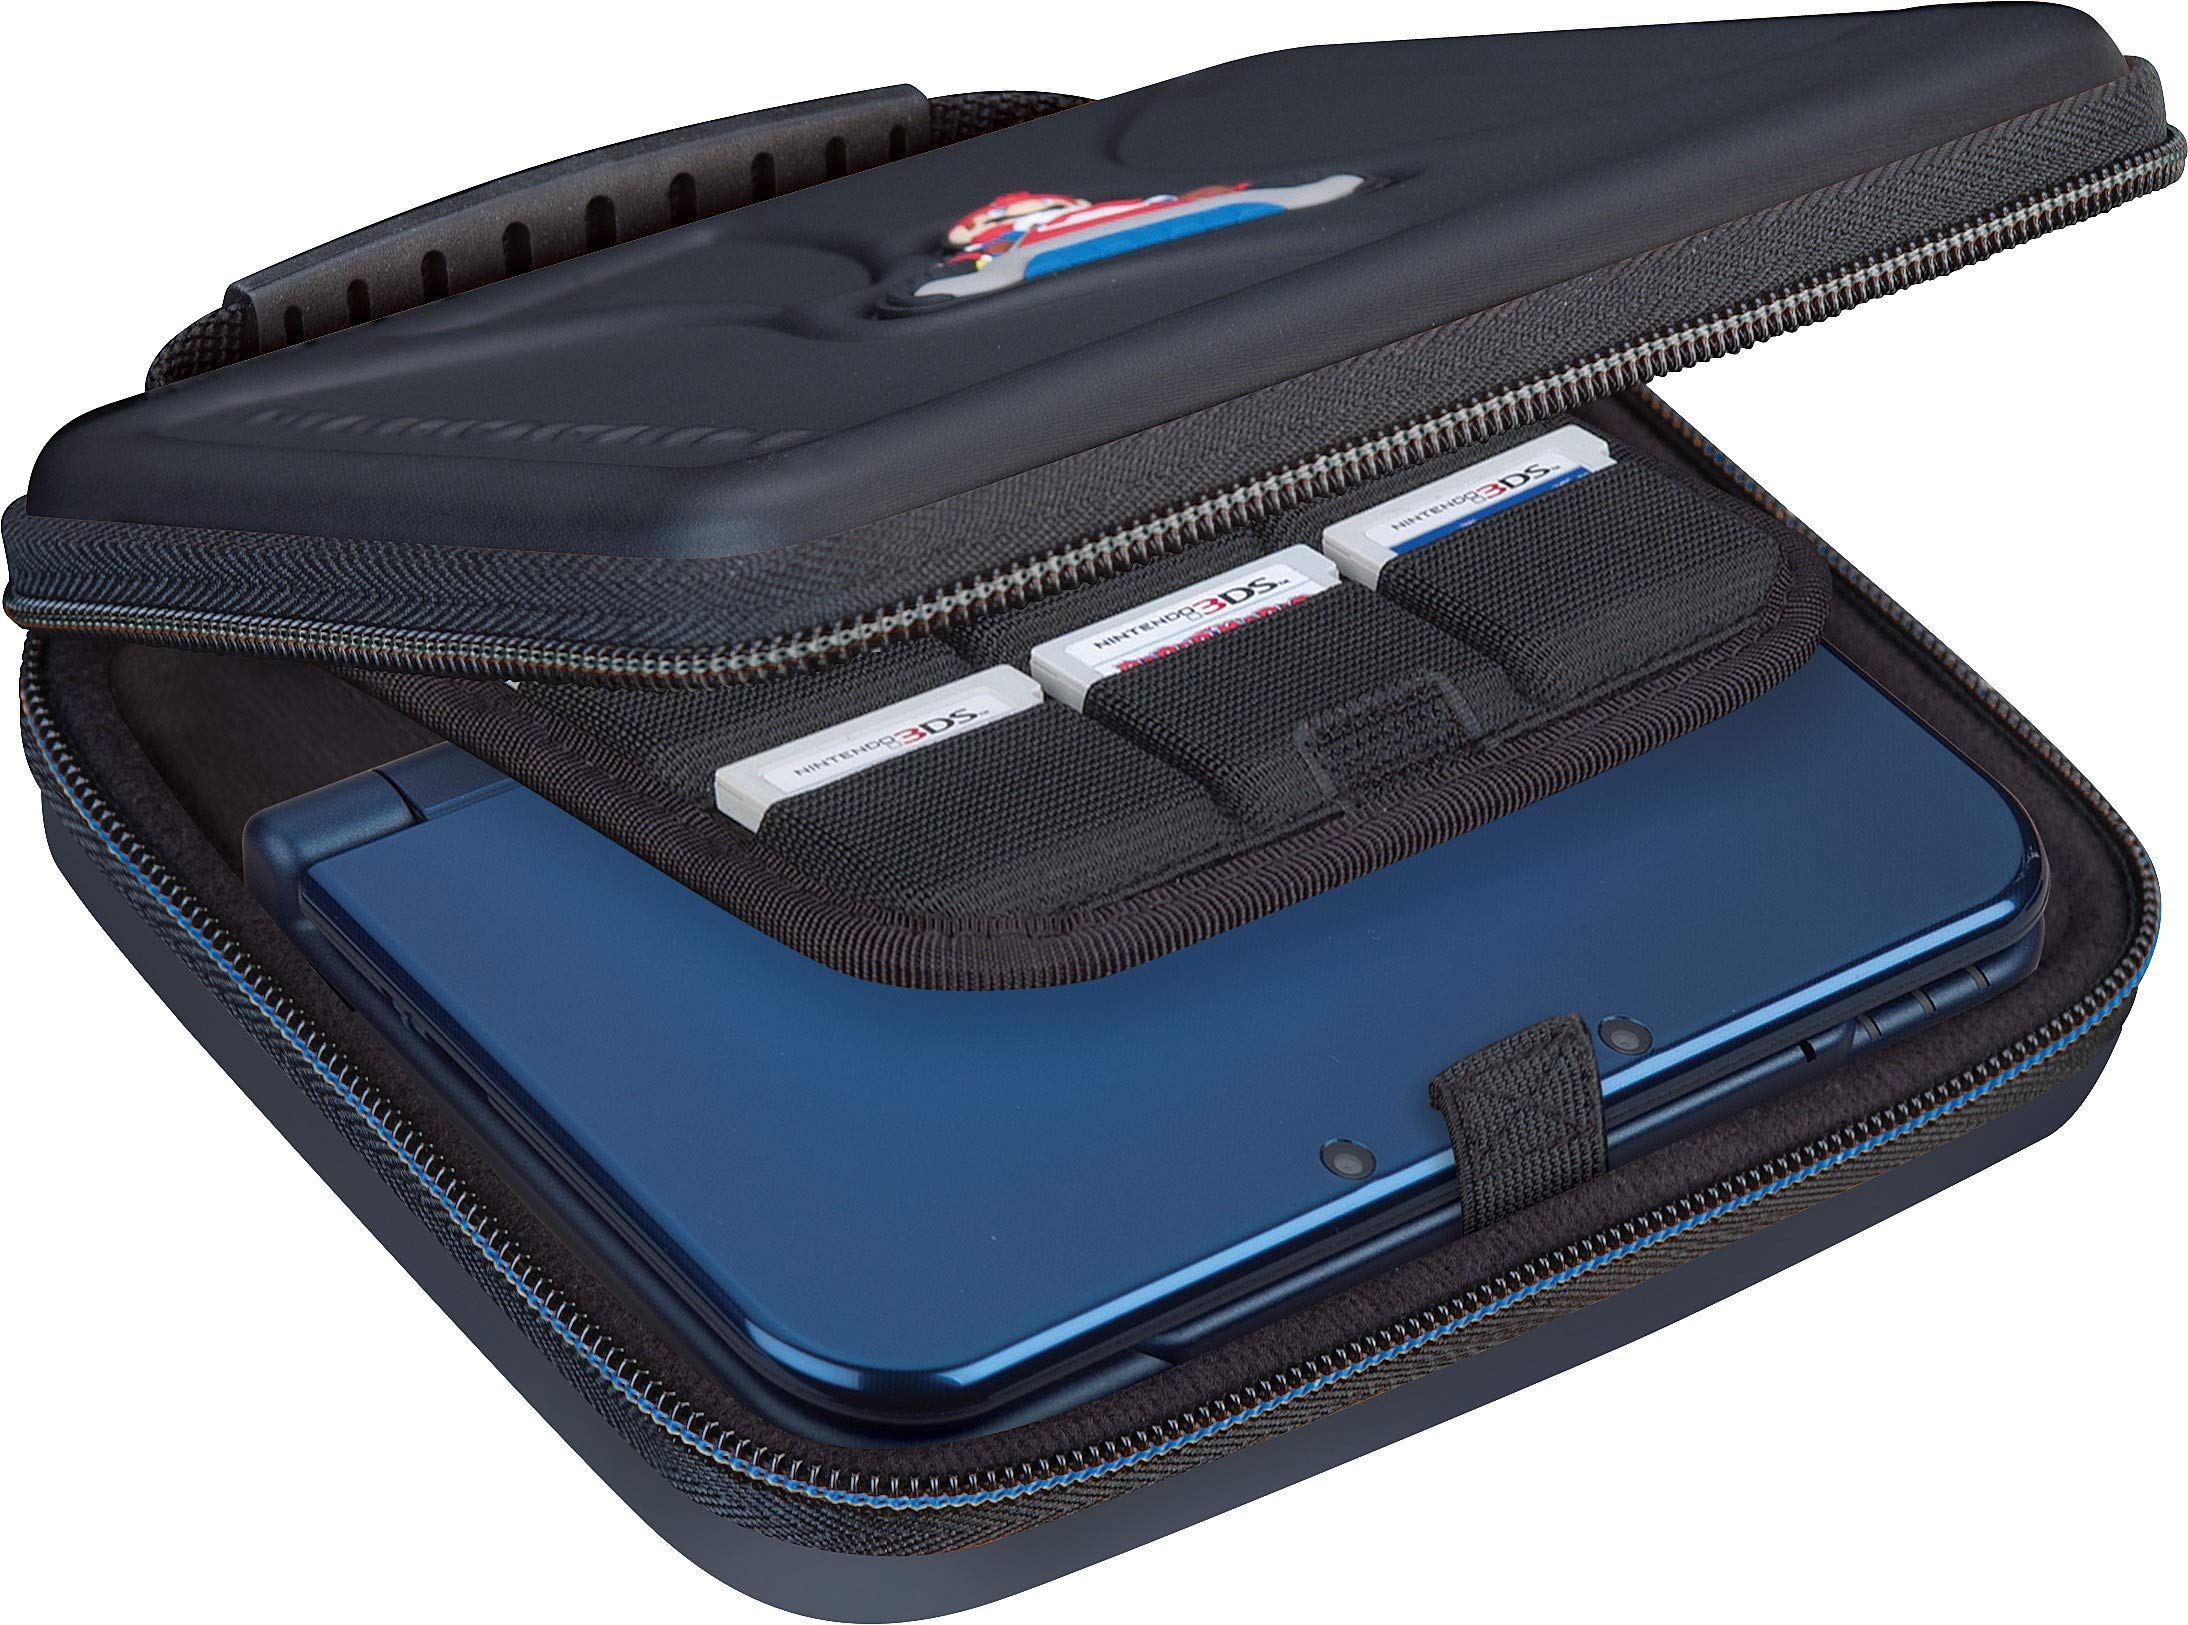 Game Traveler Nintendo 3DS or 2DS Case - Compatible with Nintendo 3DS, 3DS XL, 2DS, 2DS XL, New 3DS, 3DSi, 3DSi XL - Includes Game Card Pouch - Licensed by Nintendo